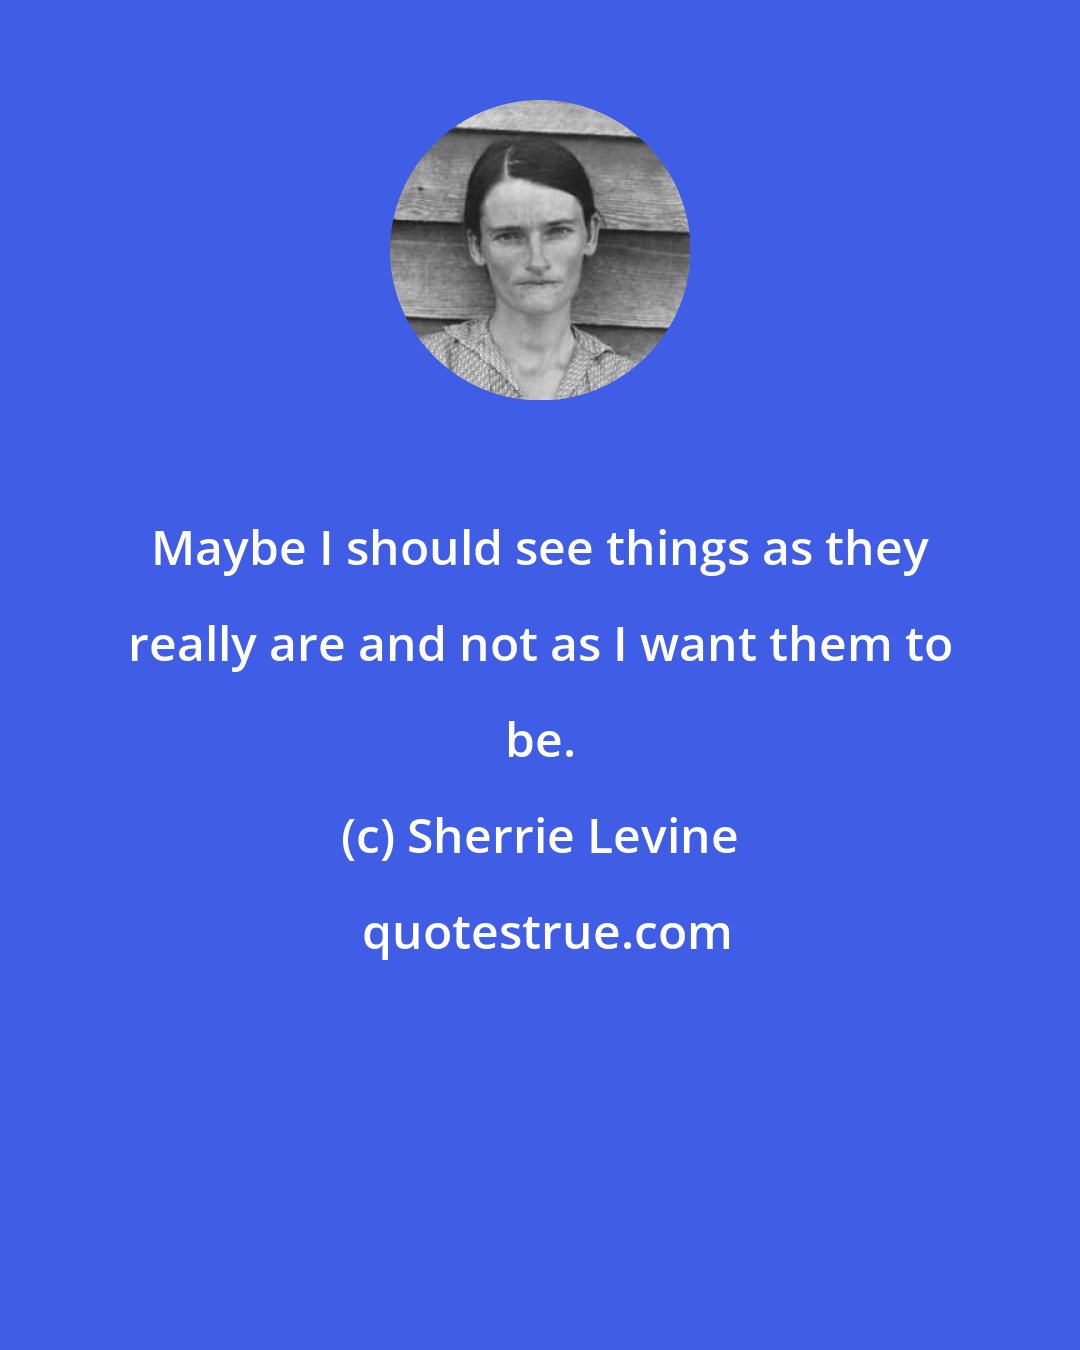 Sherrie Levine: Maybe I should see things as they really are and not as I want them to be.